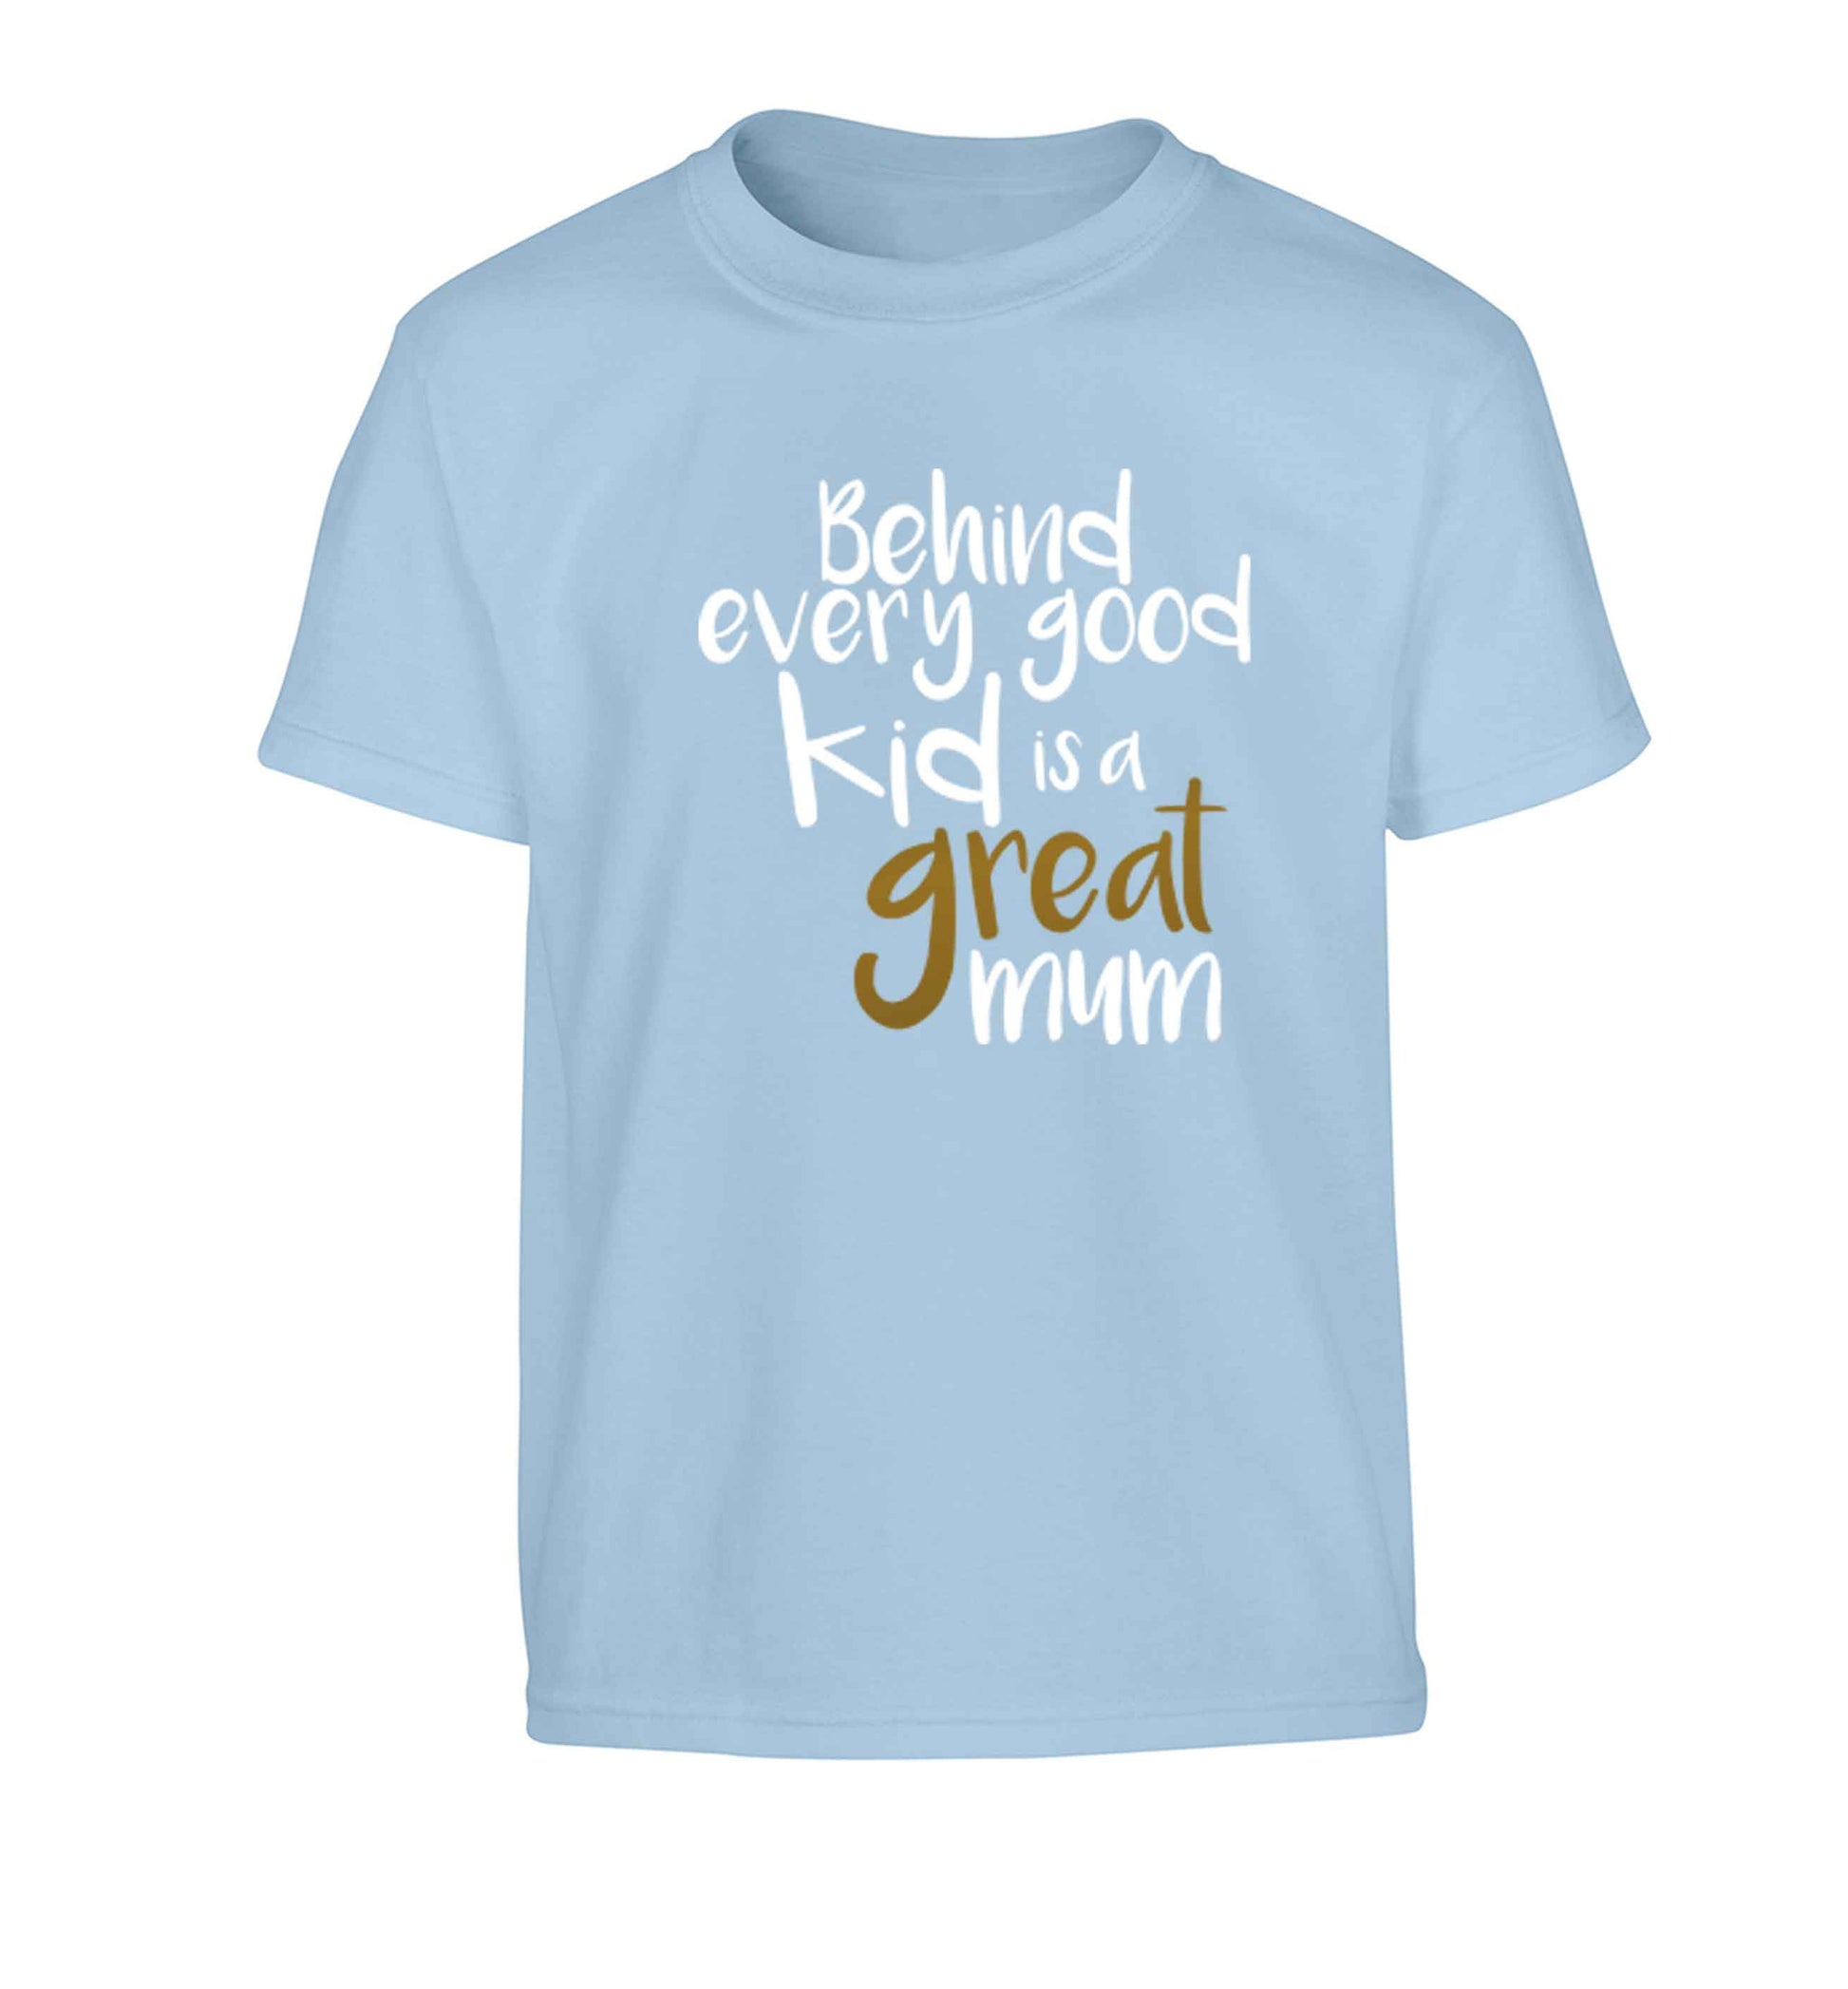 Behind every good kid is a great mum Children's light blue Tshirt 12-13 Years